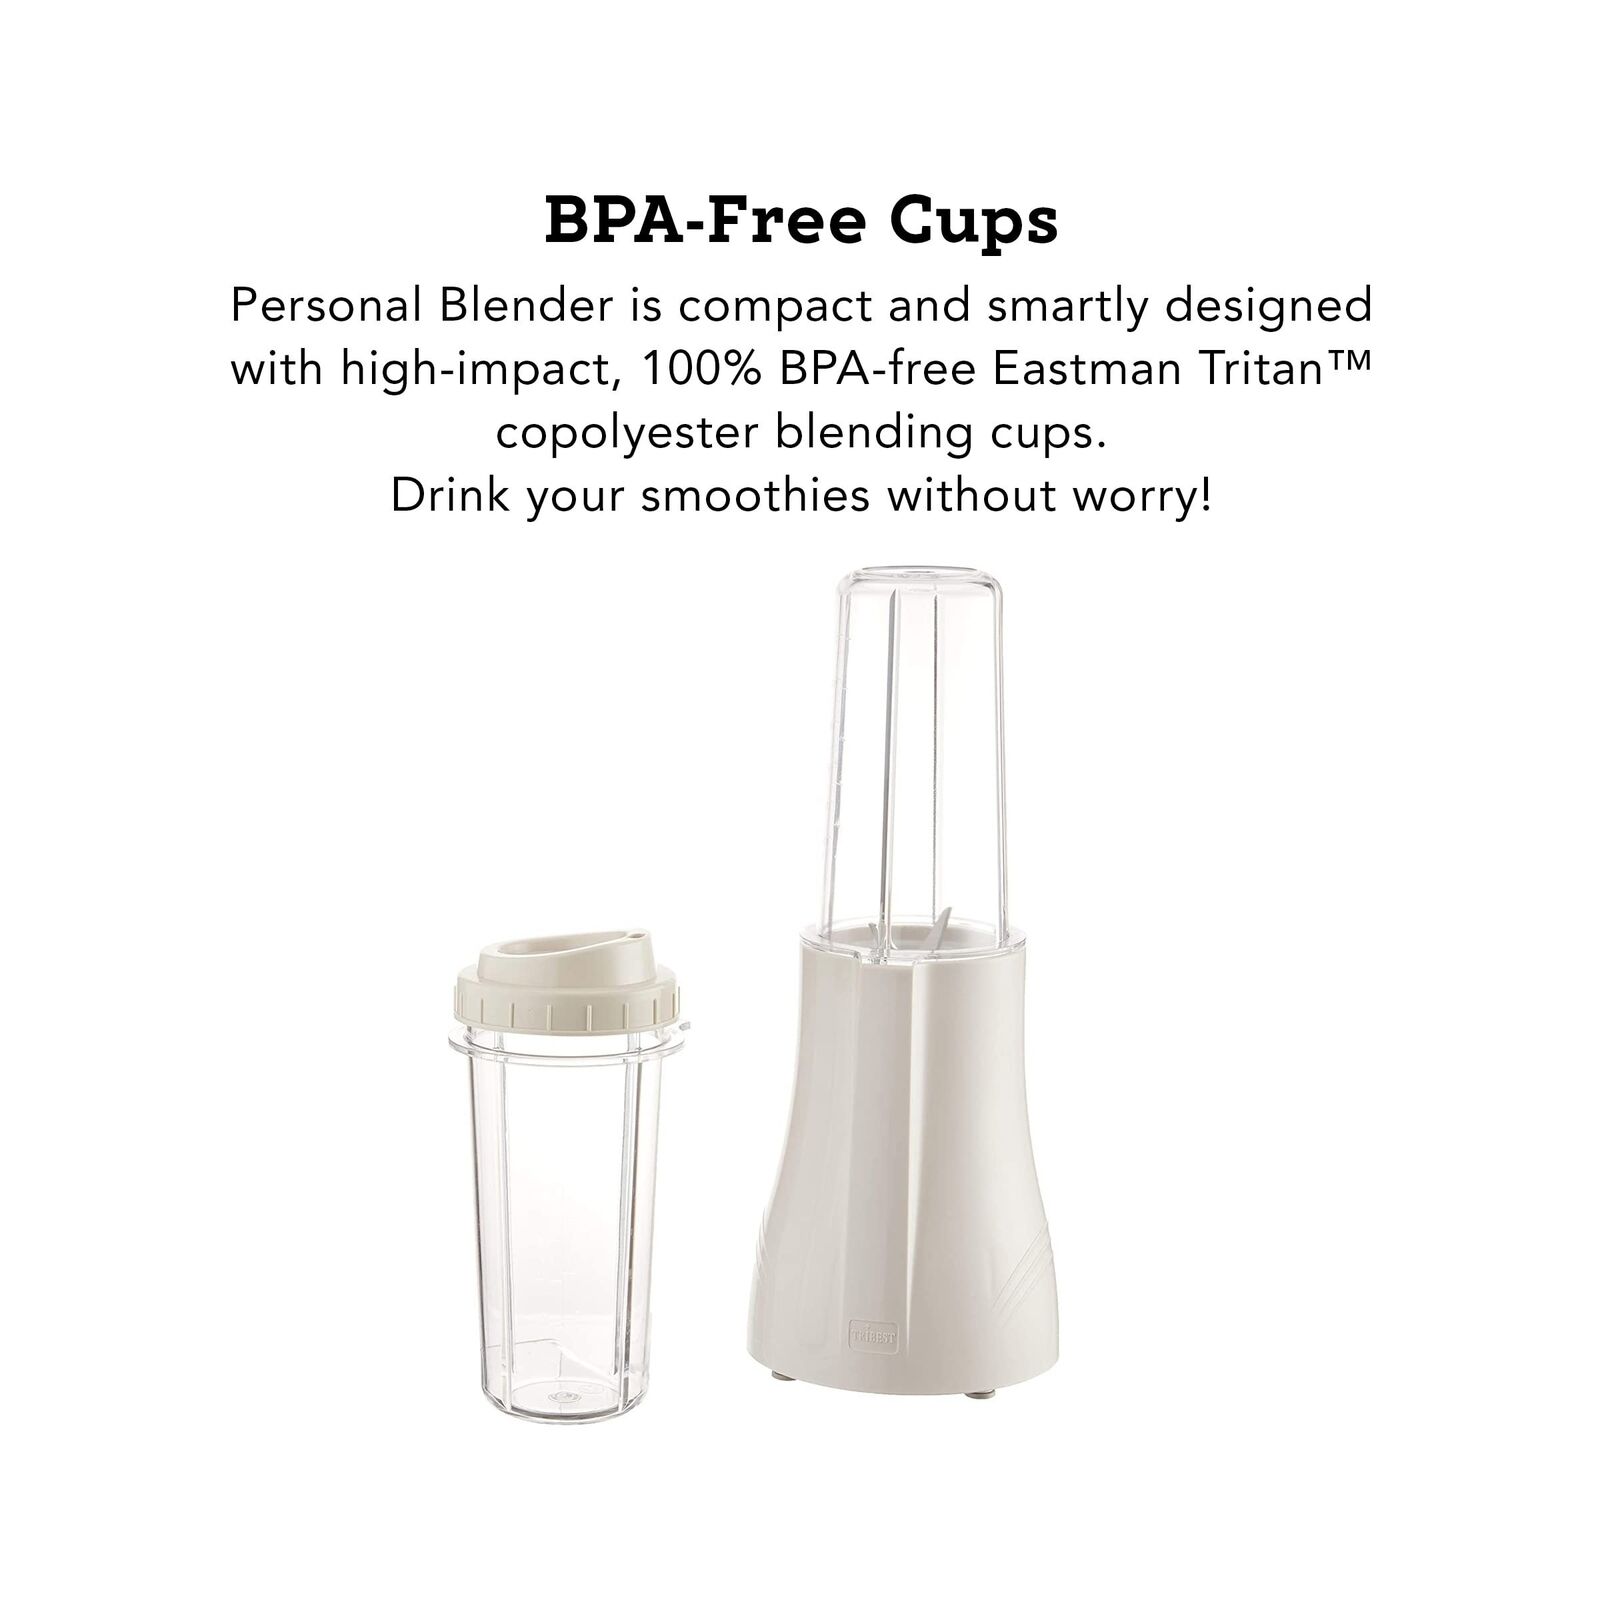 GCP Products Pb-250 Kitchen Grinder & Personal Blender For Shakes And Smoothies Wi...